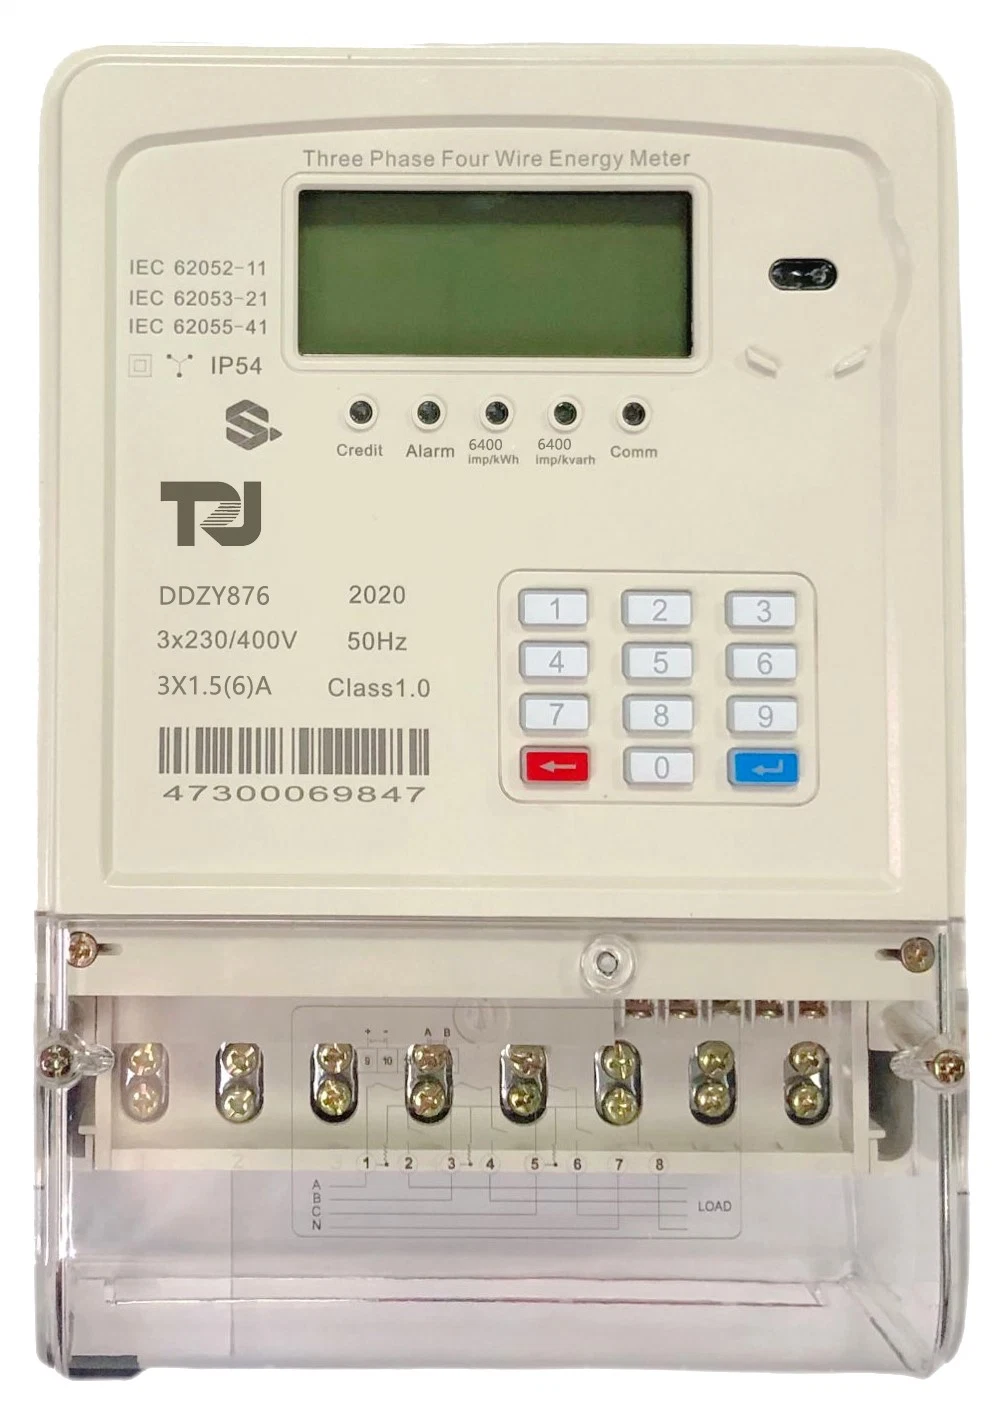 DTZY876 CT Meter STS Prepayment Postpayment Three Phase Four Wire Keypad Electronic RF LoRa PLC GPRS 3G 4G Module Communication Split Smart Energy Meter